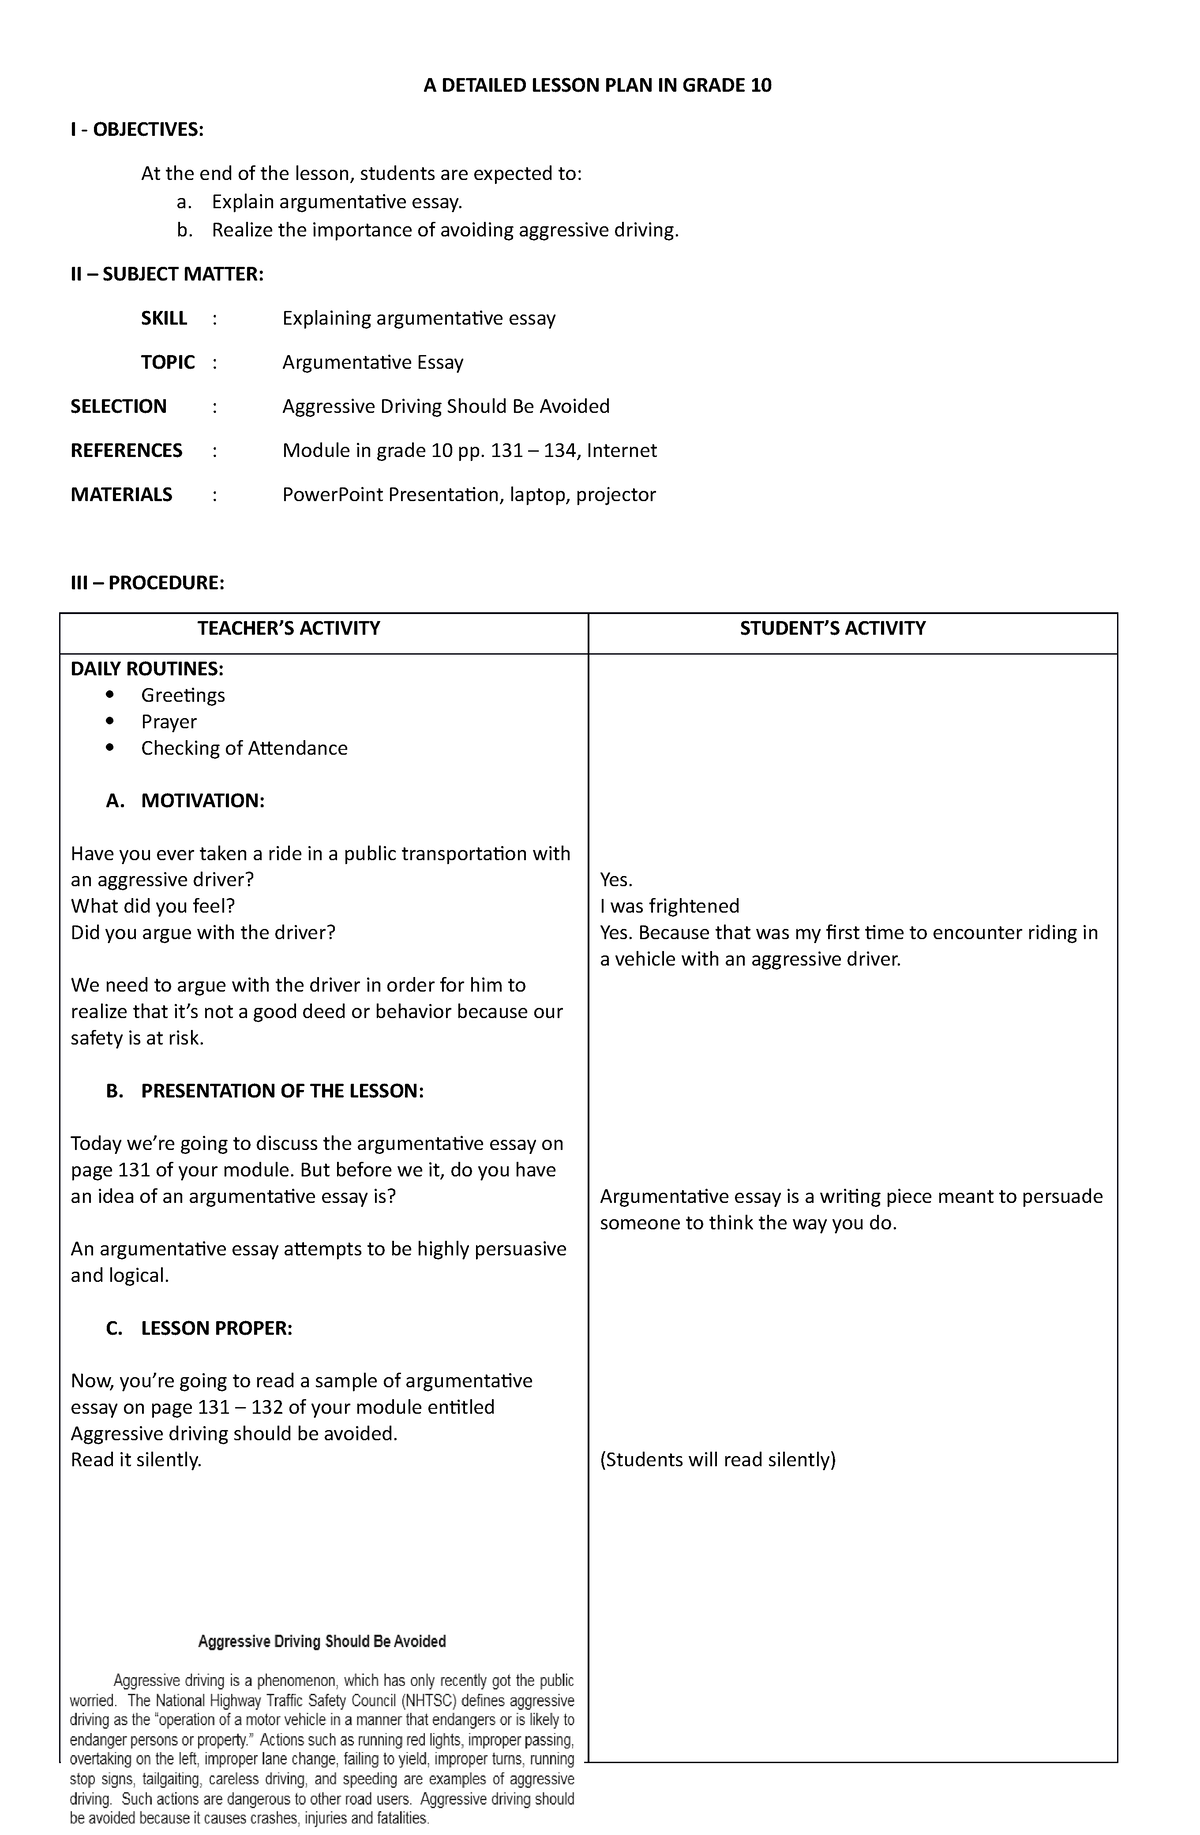 A Detailed Lesson Plan In Grade 10 A Detailed Lesson Plan In Grade 10 I Objectives At The 0416